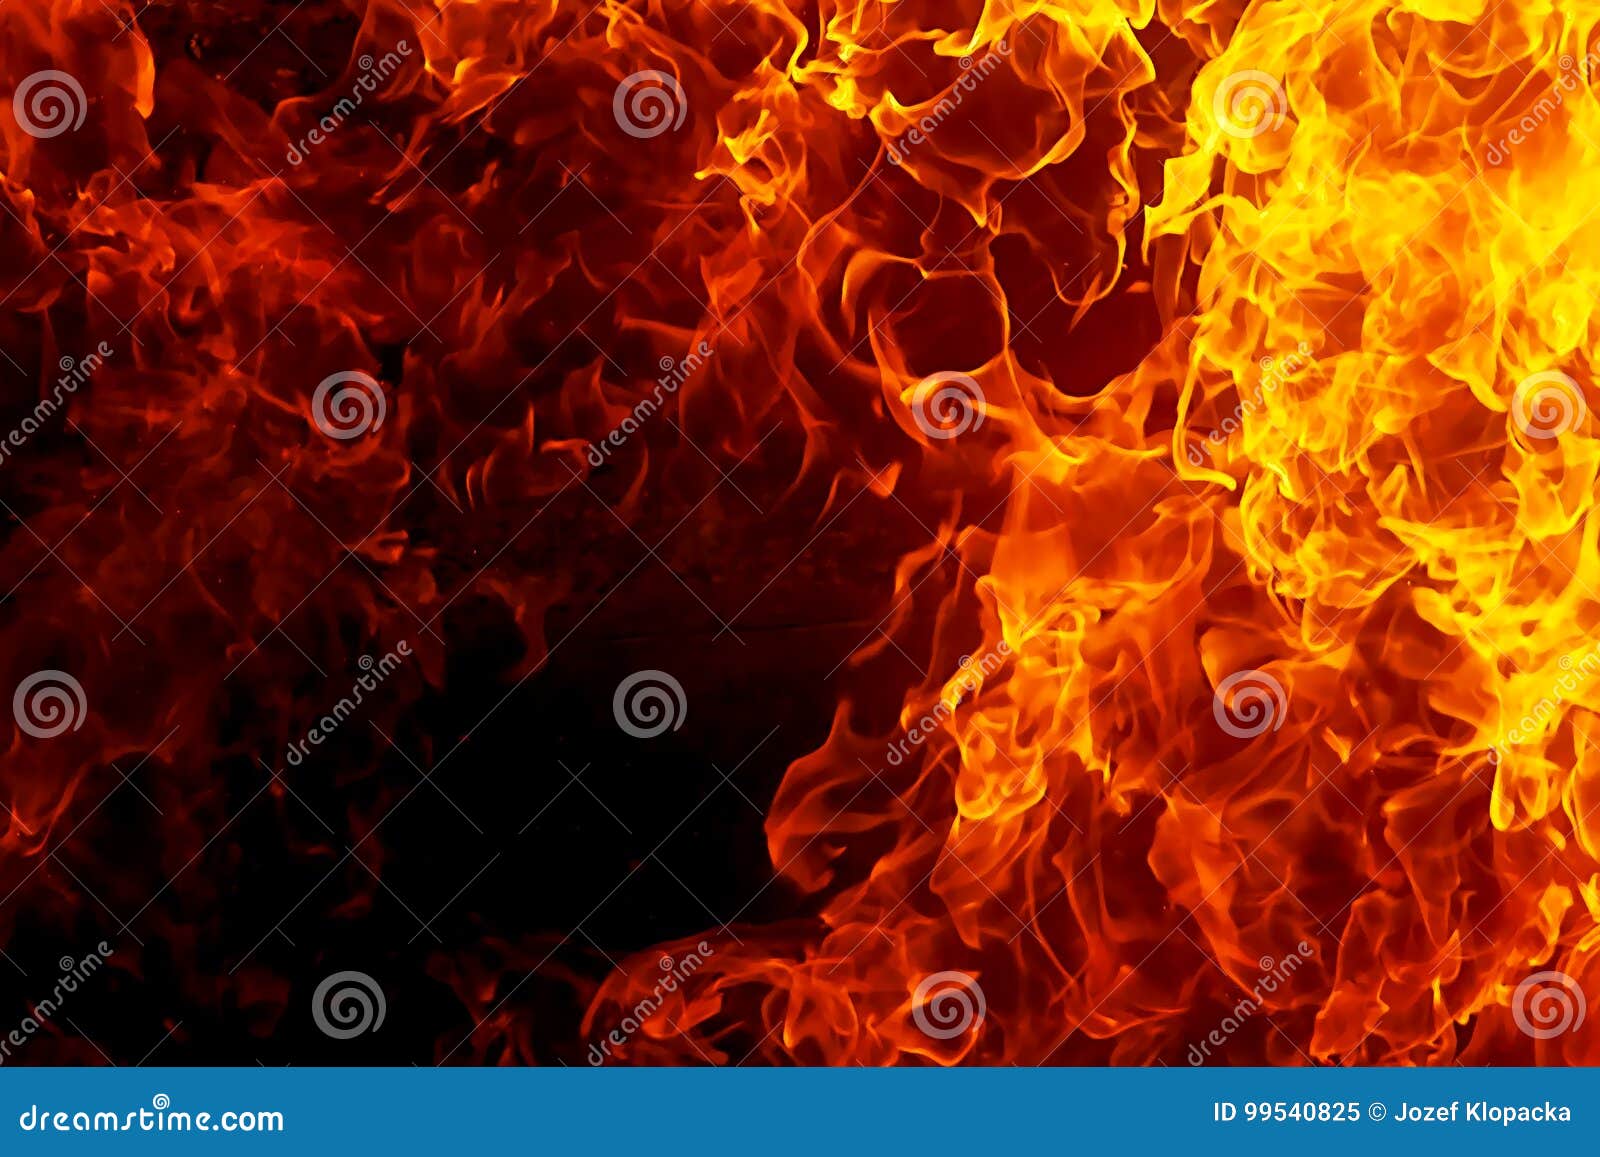 Fire Flames Background. Original Flame and Graphic Effect. Stock Image -  Image of danger, design: 99540825